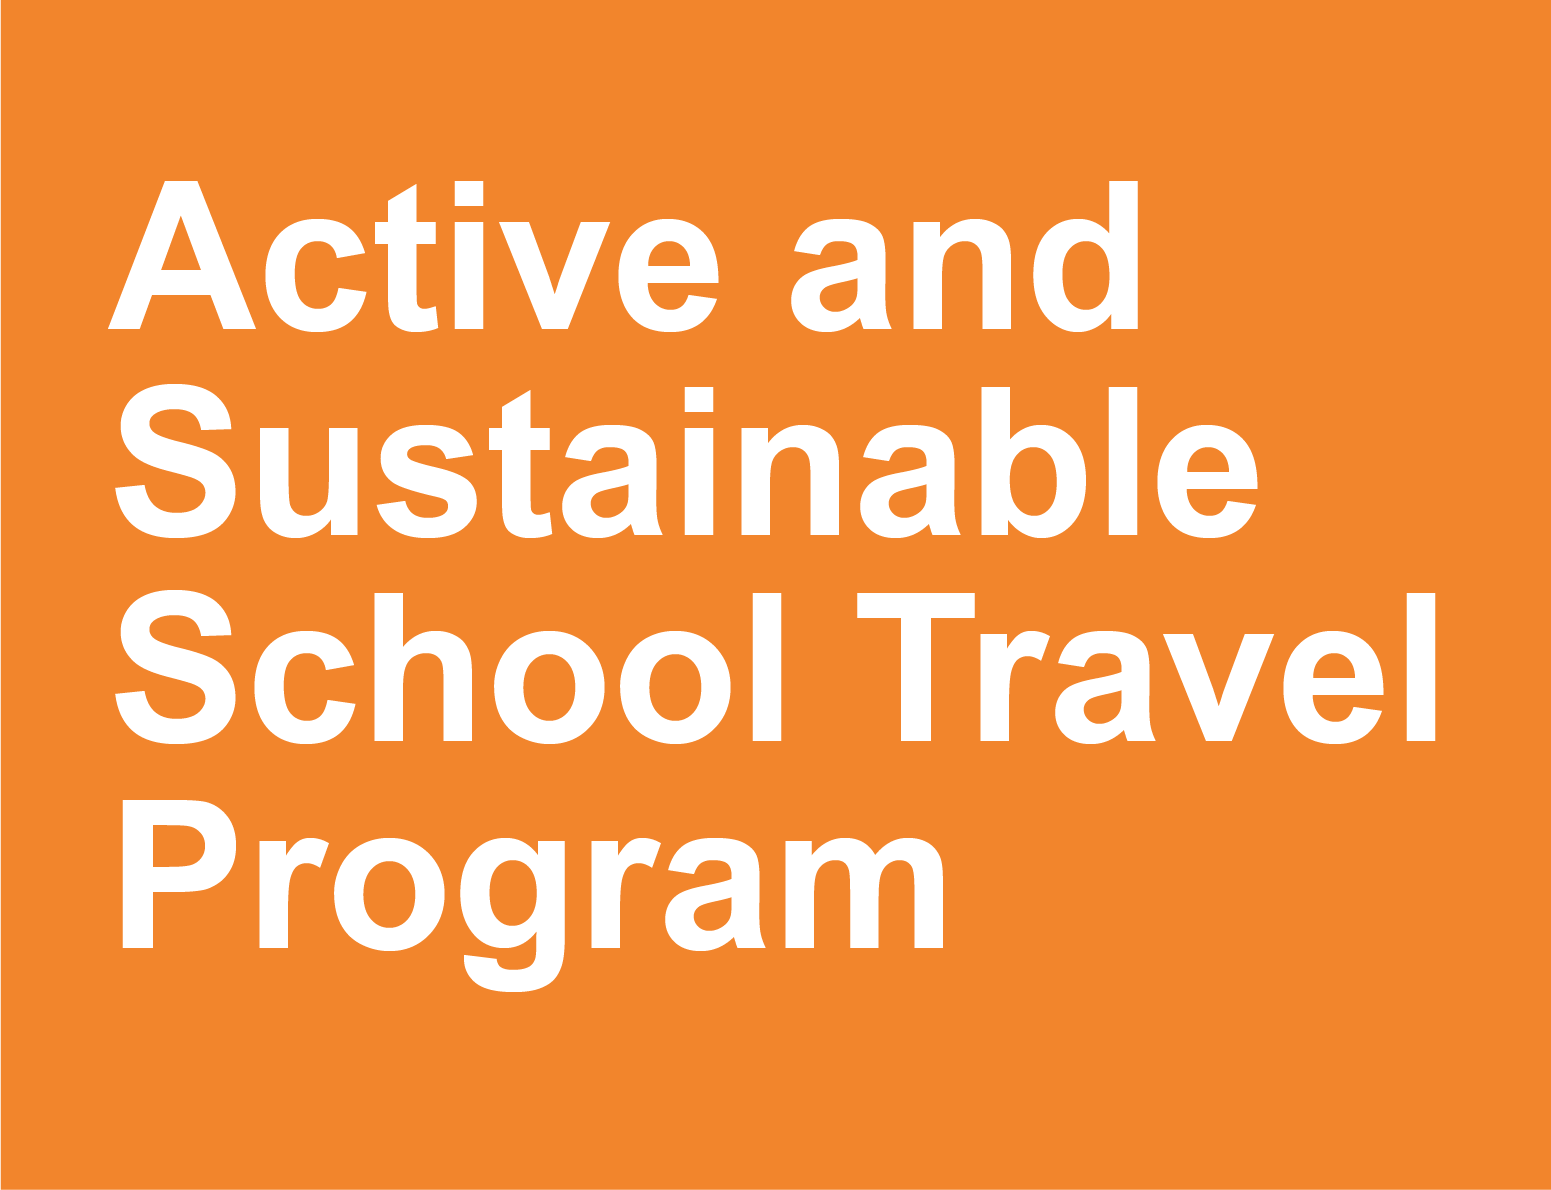 Active and Sustainable School Travel Program